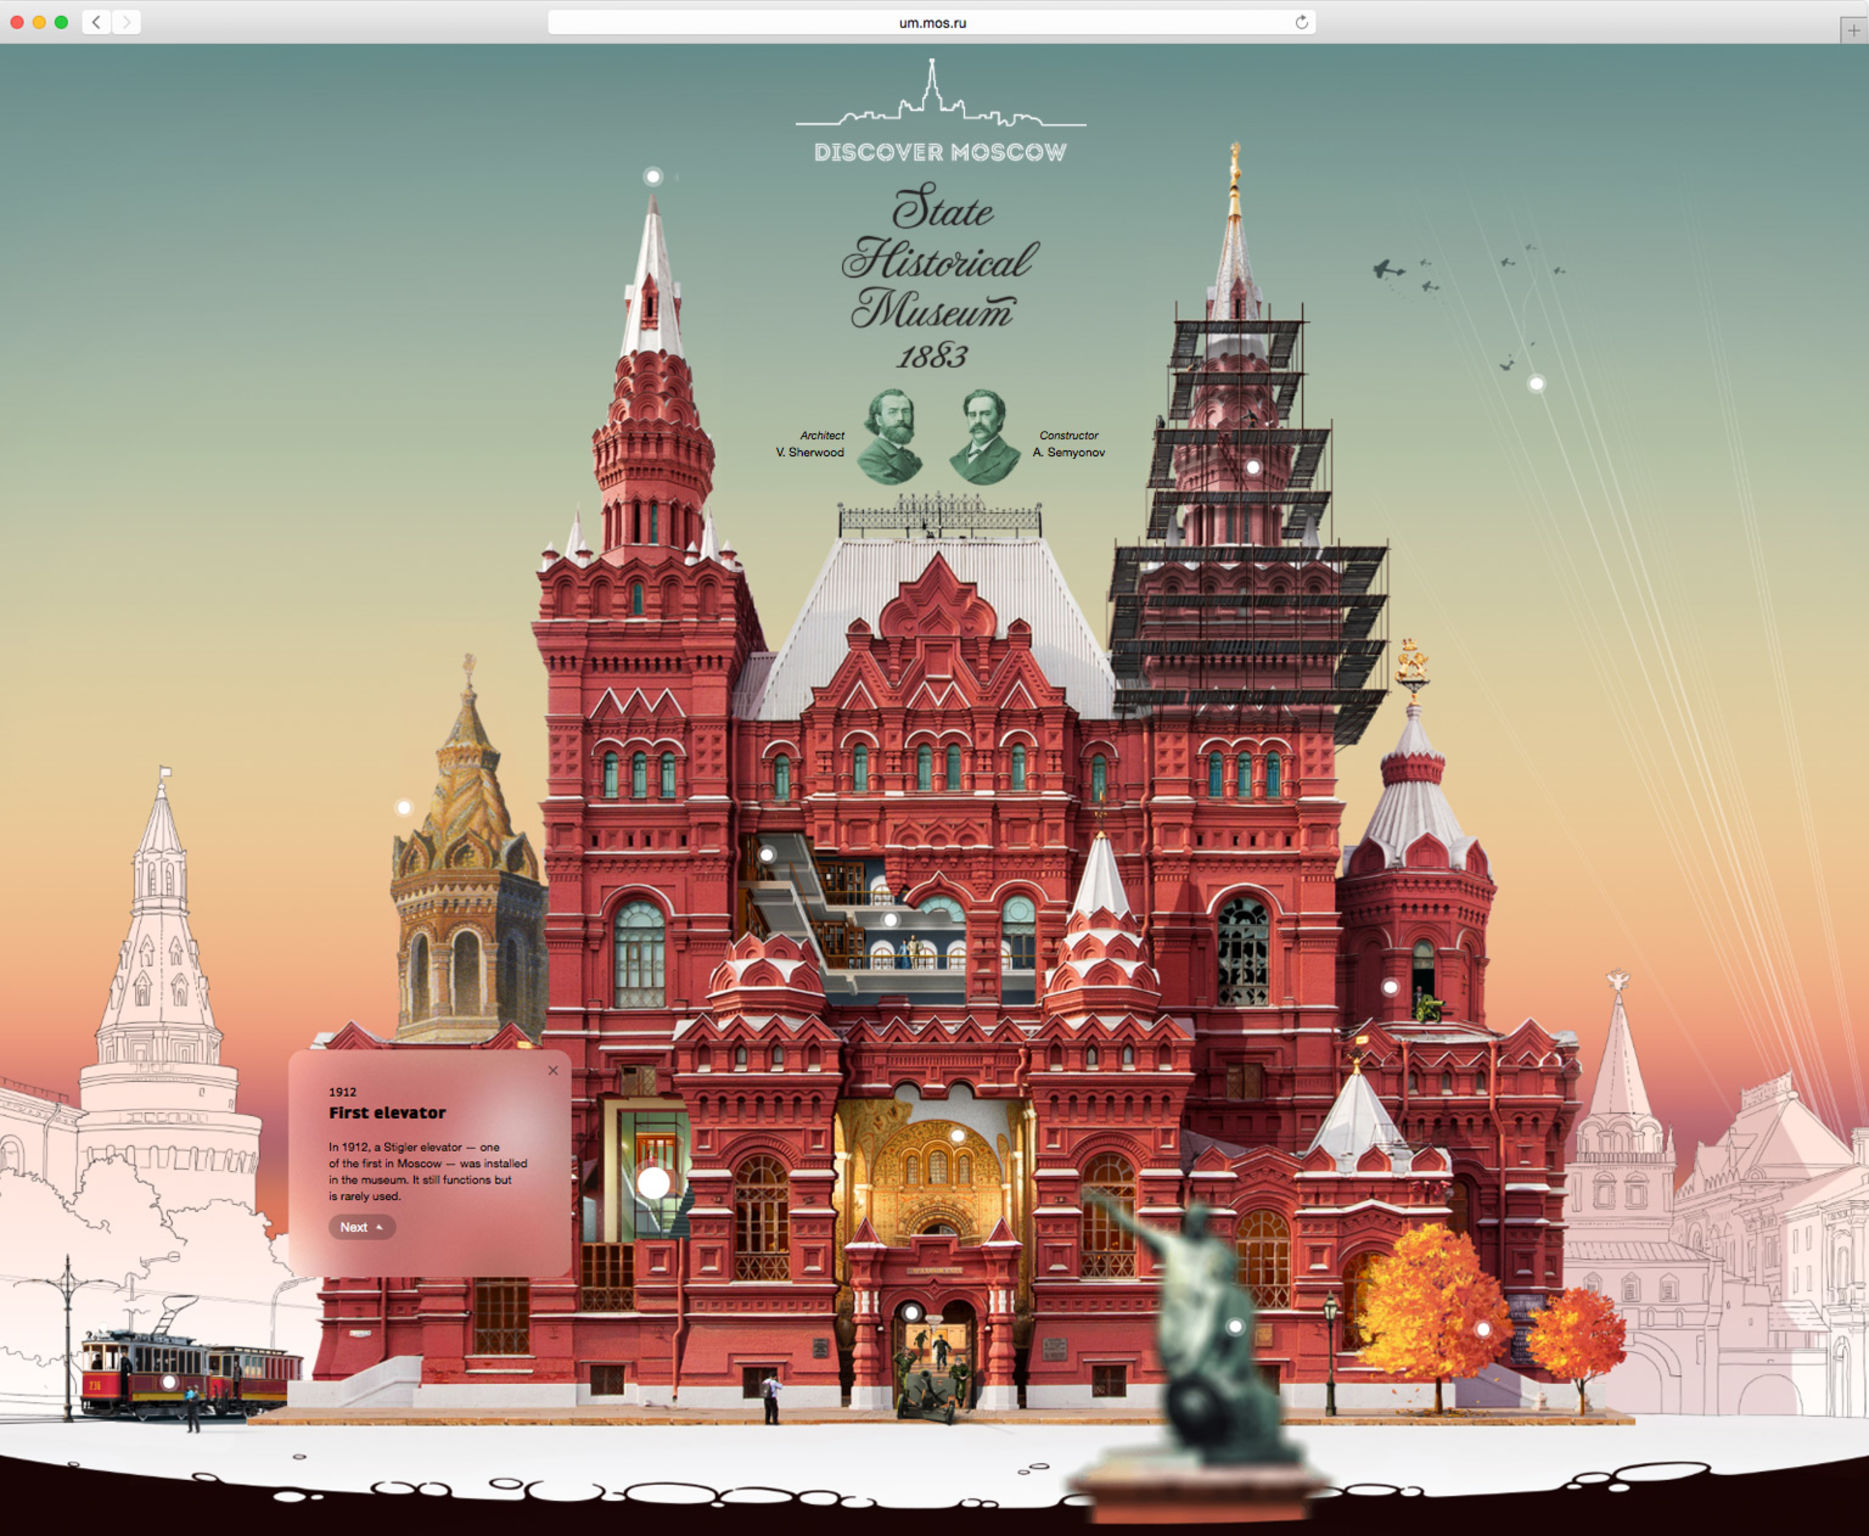 Discover Moscow promosite